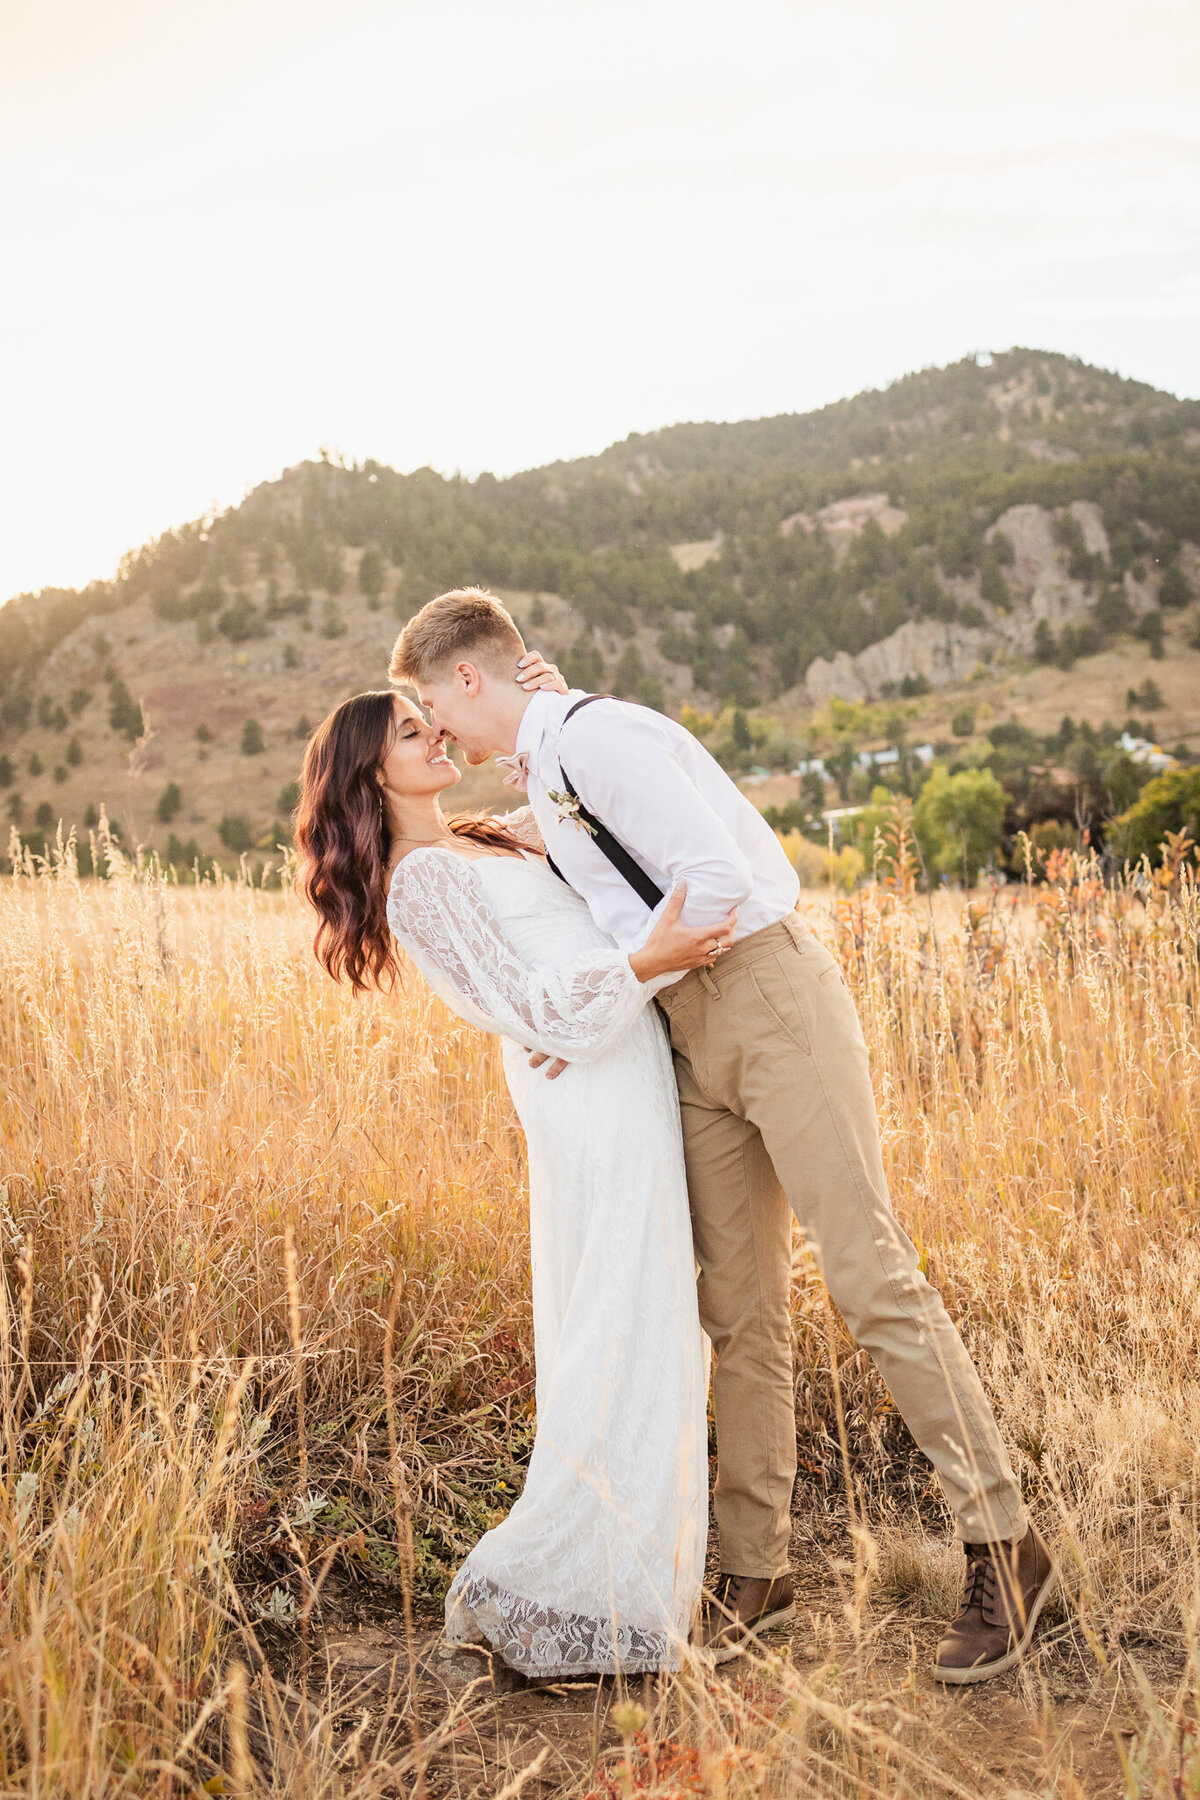 Bride and groom kiss in a field with mountains